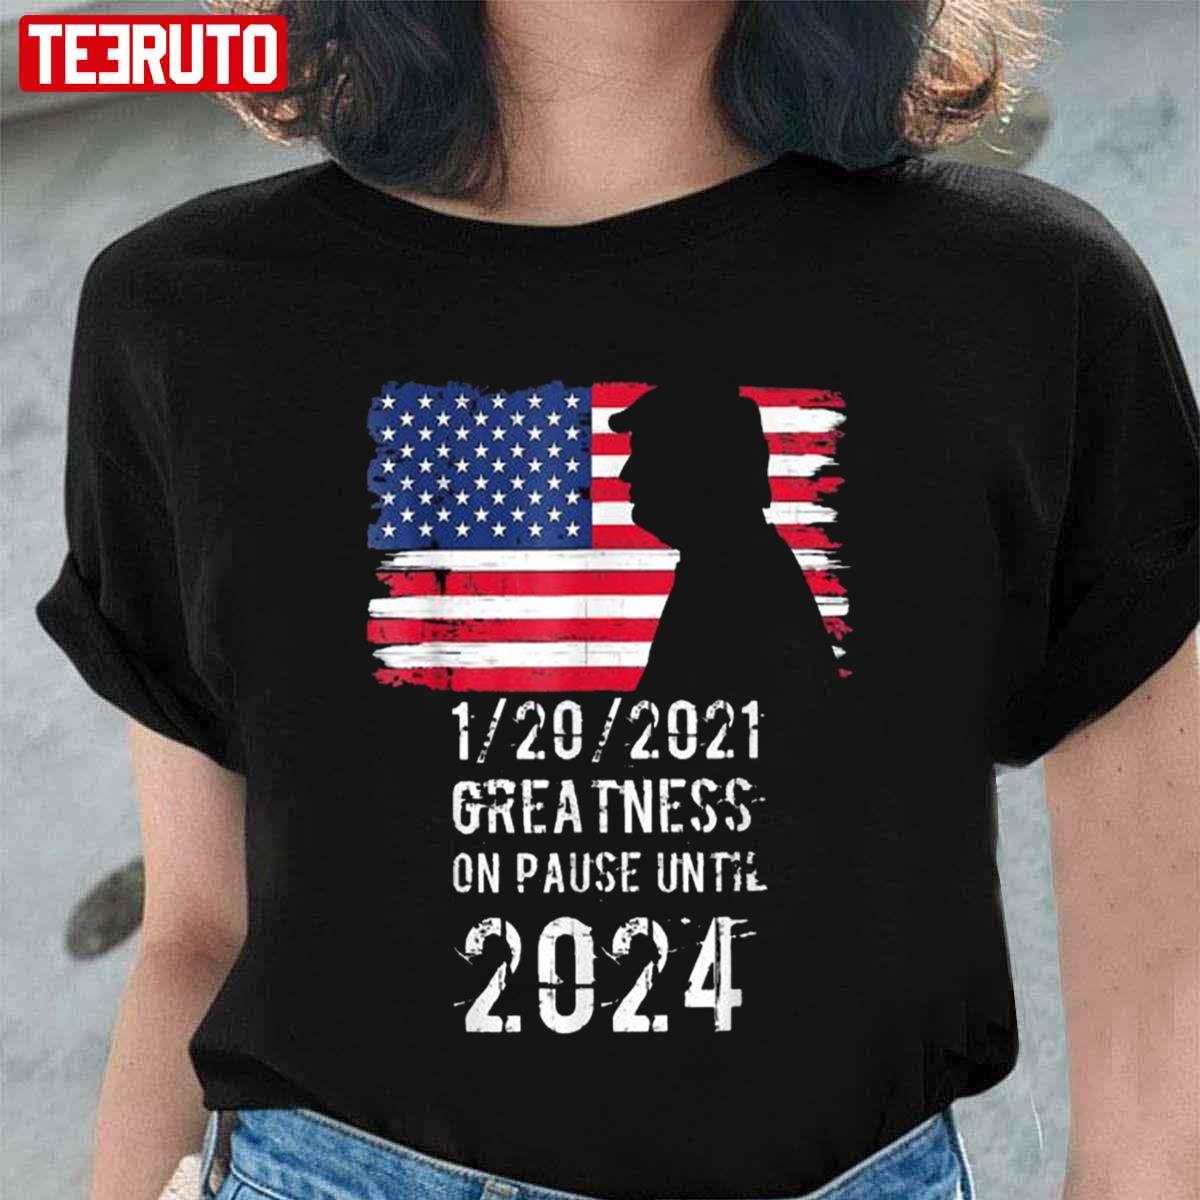 01 20 2021 Greatness On Pause Until 2024 Pro Donald Trump American Flag Unisex T-Shirt